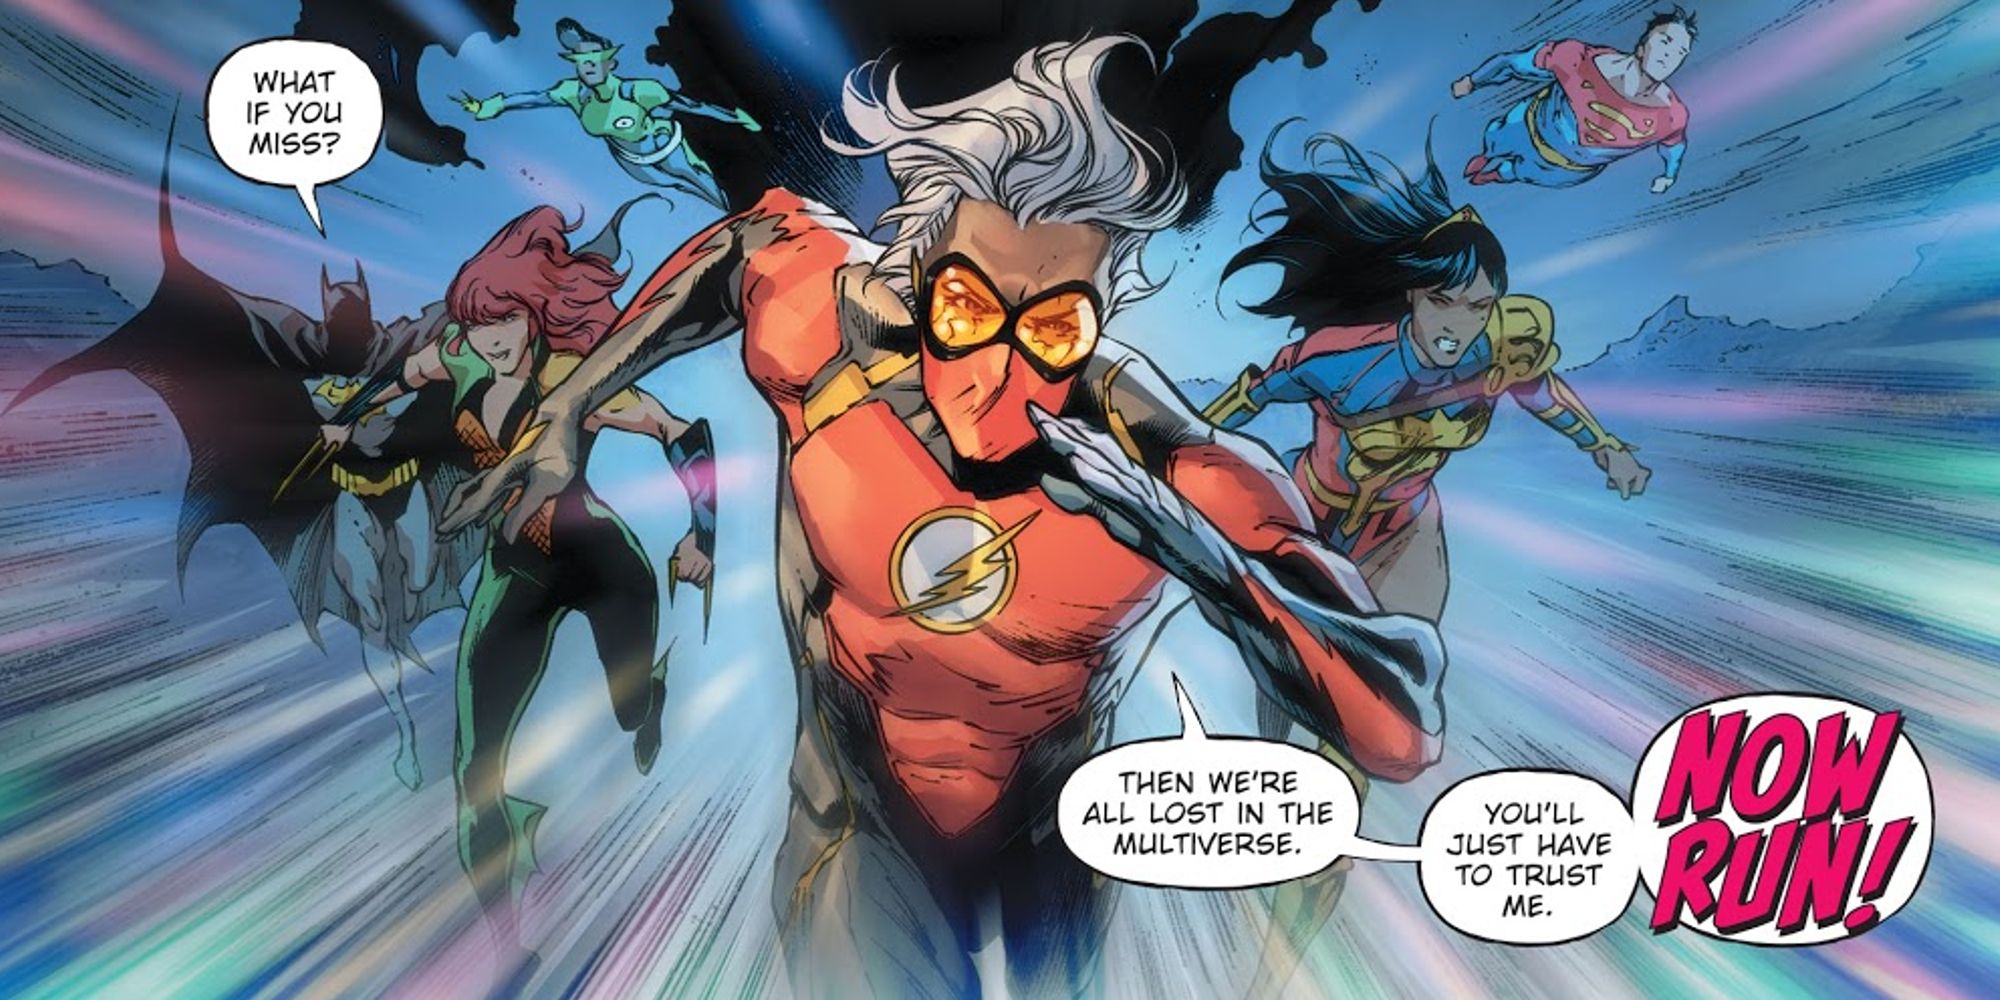 The New Justice League running through the Multiverse in Future State Justice League #2